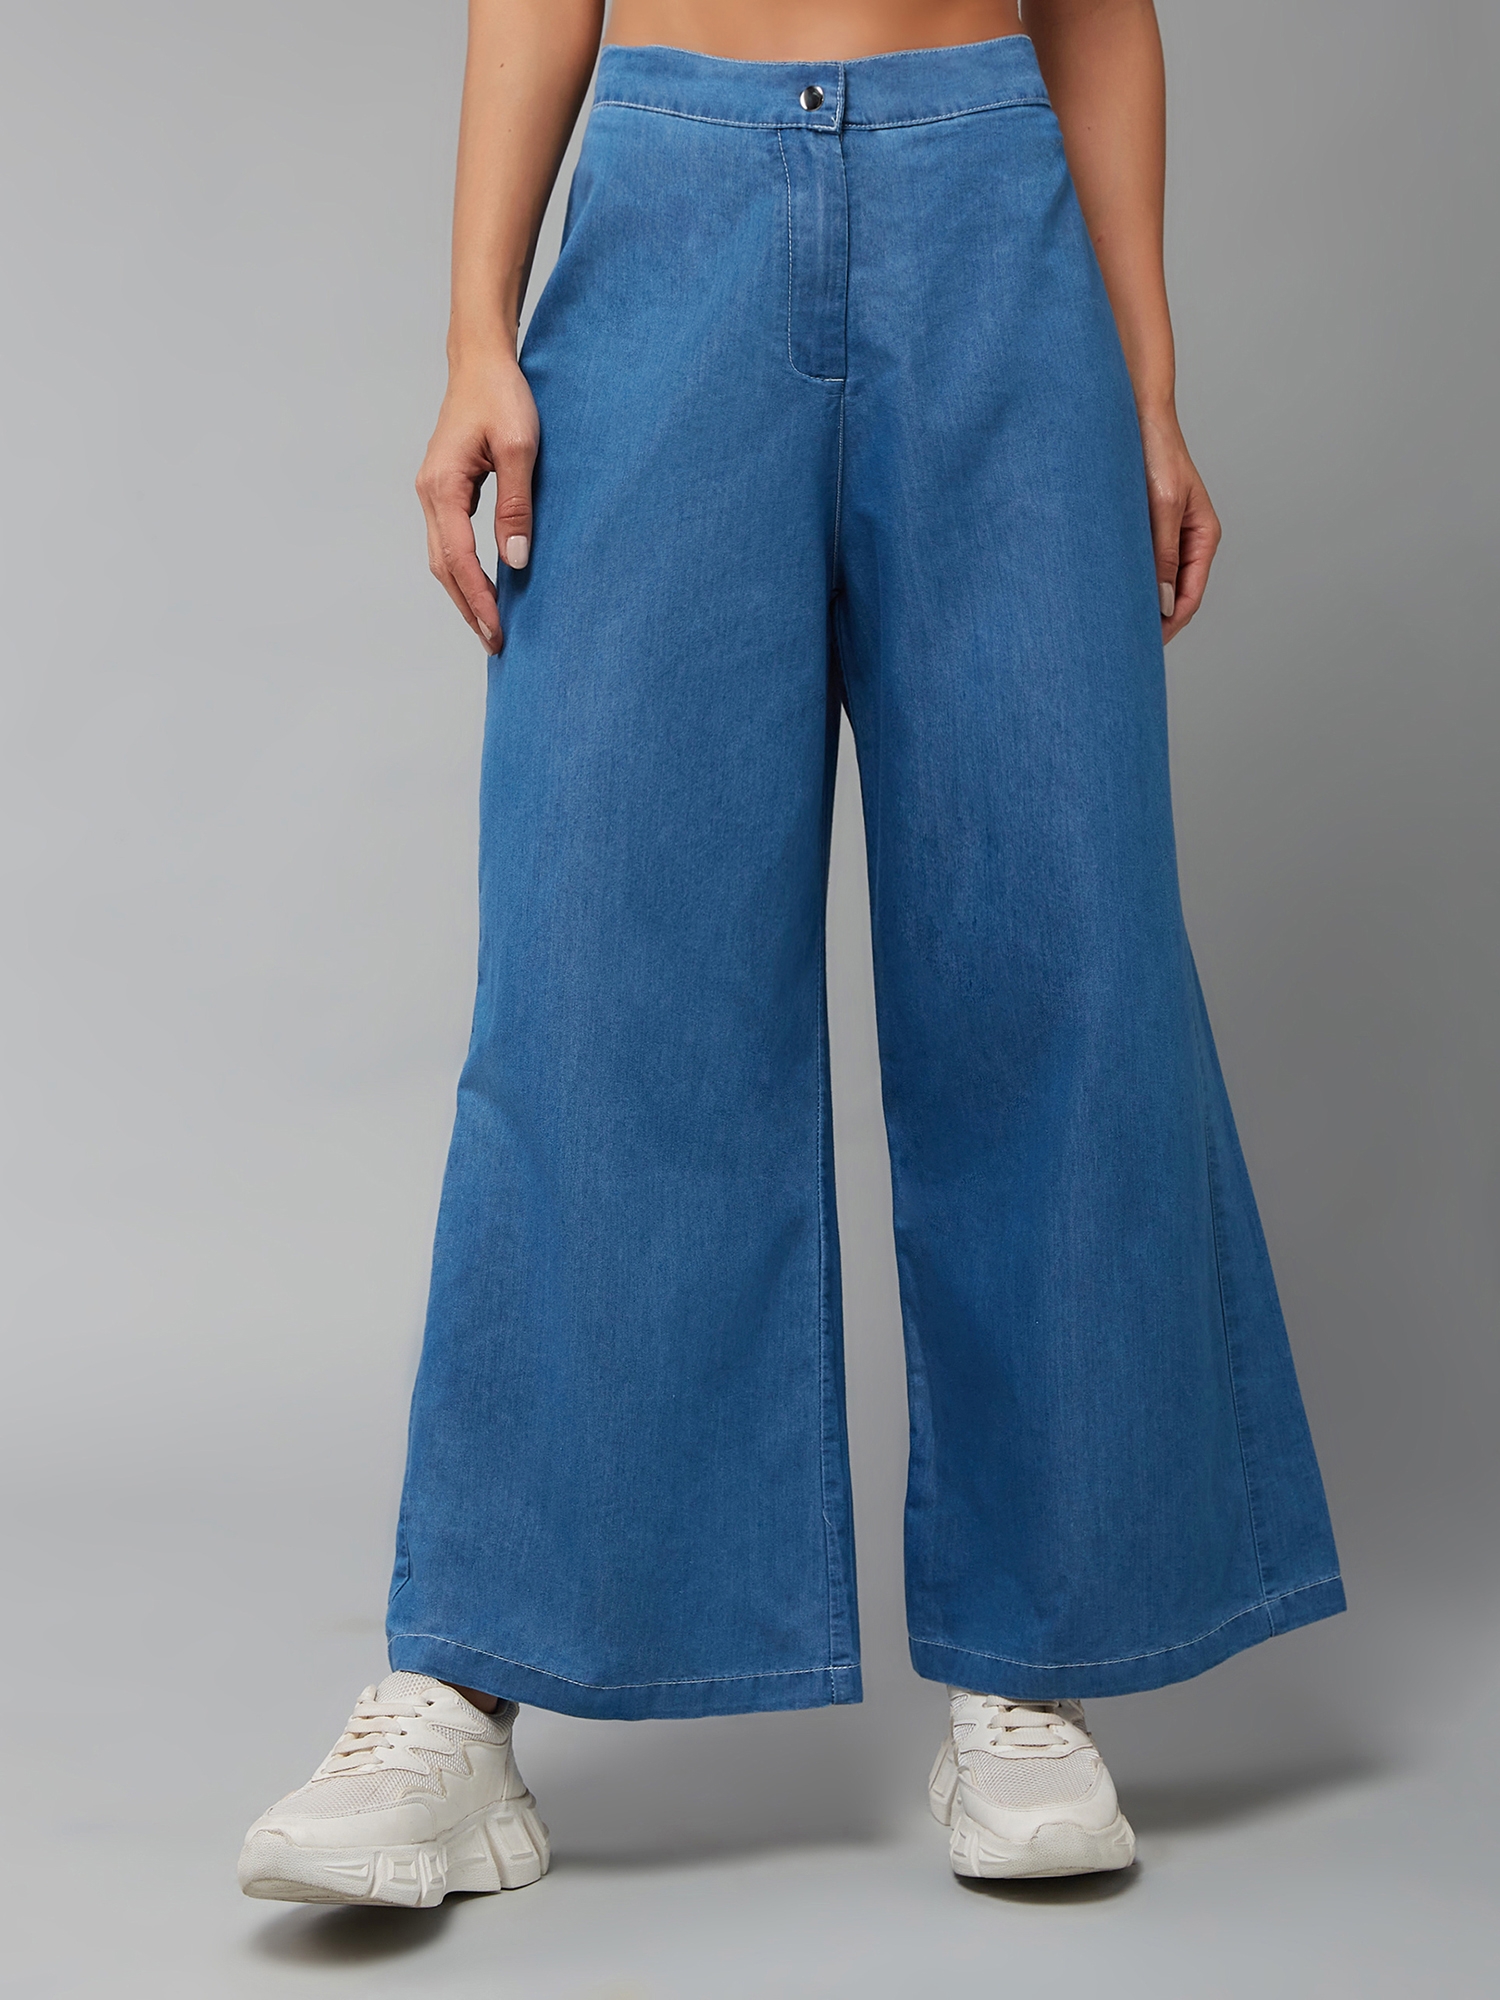 Casual Solid Wide Leg High Waist Jeans – RIGMOR